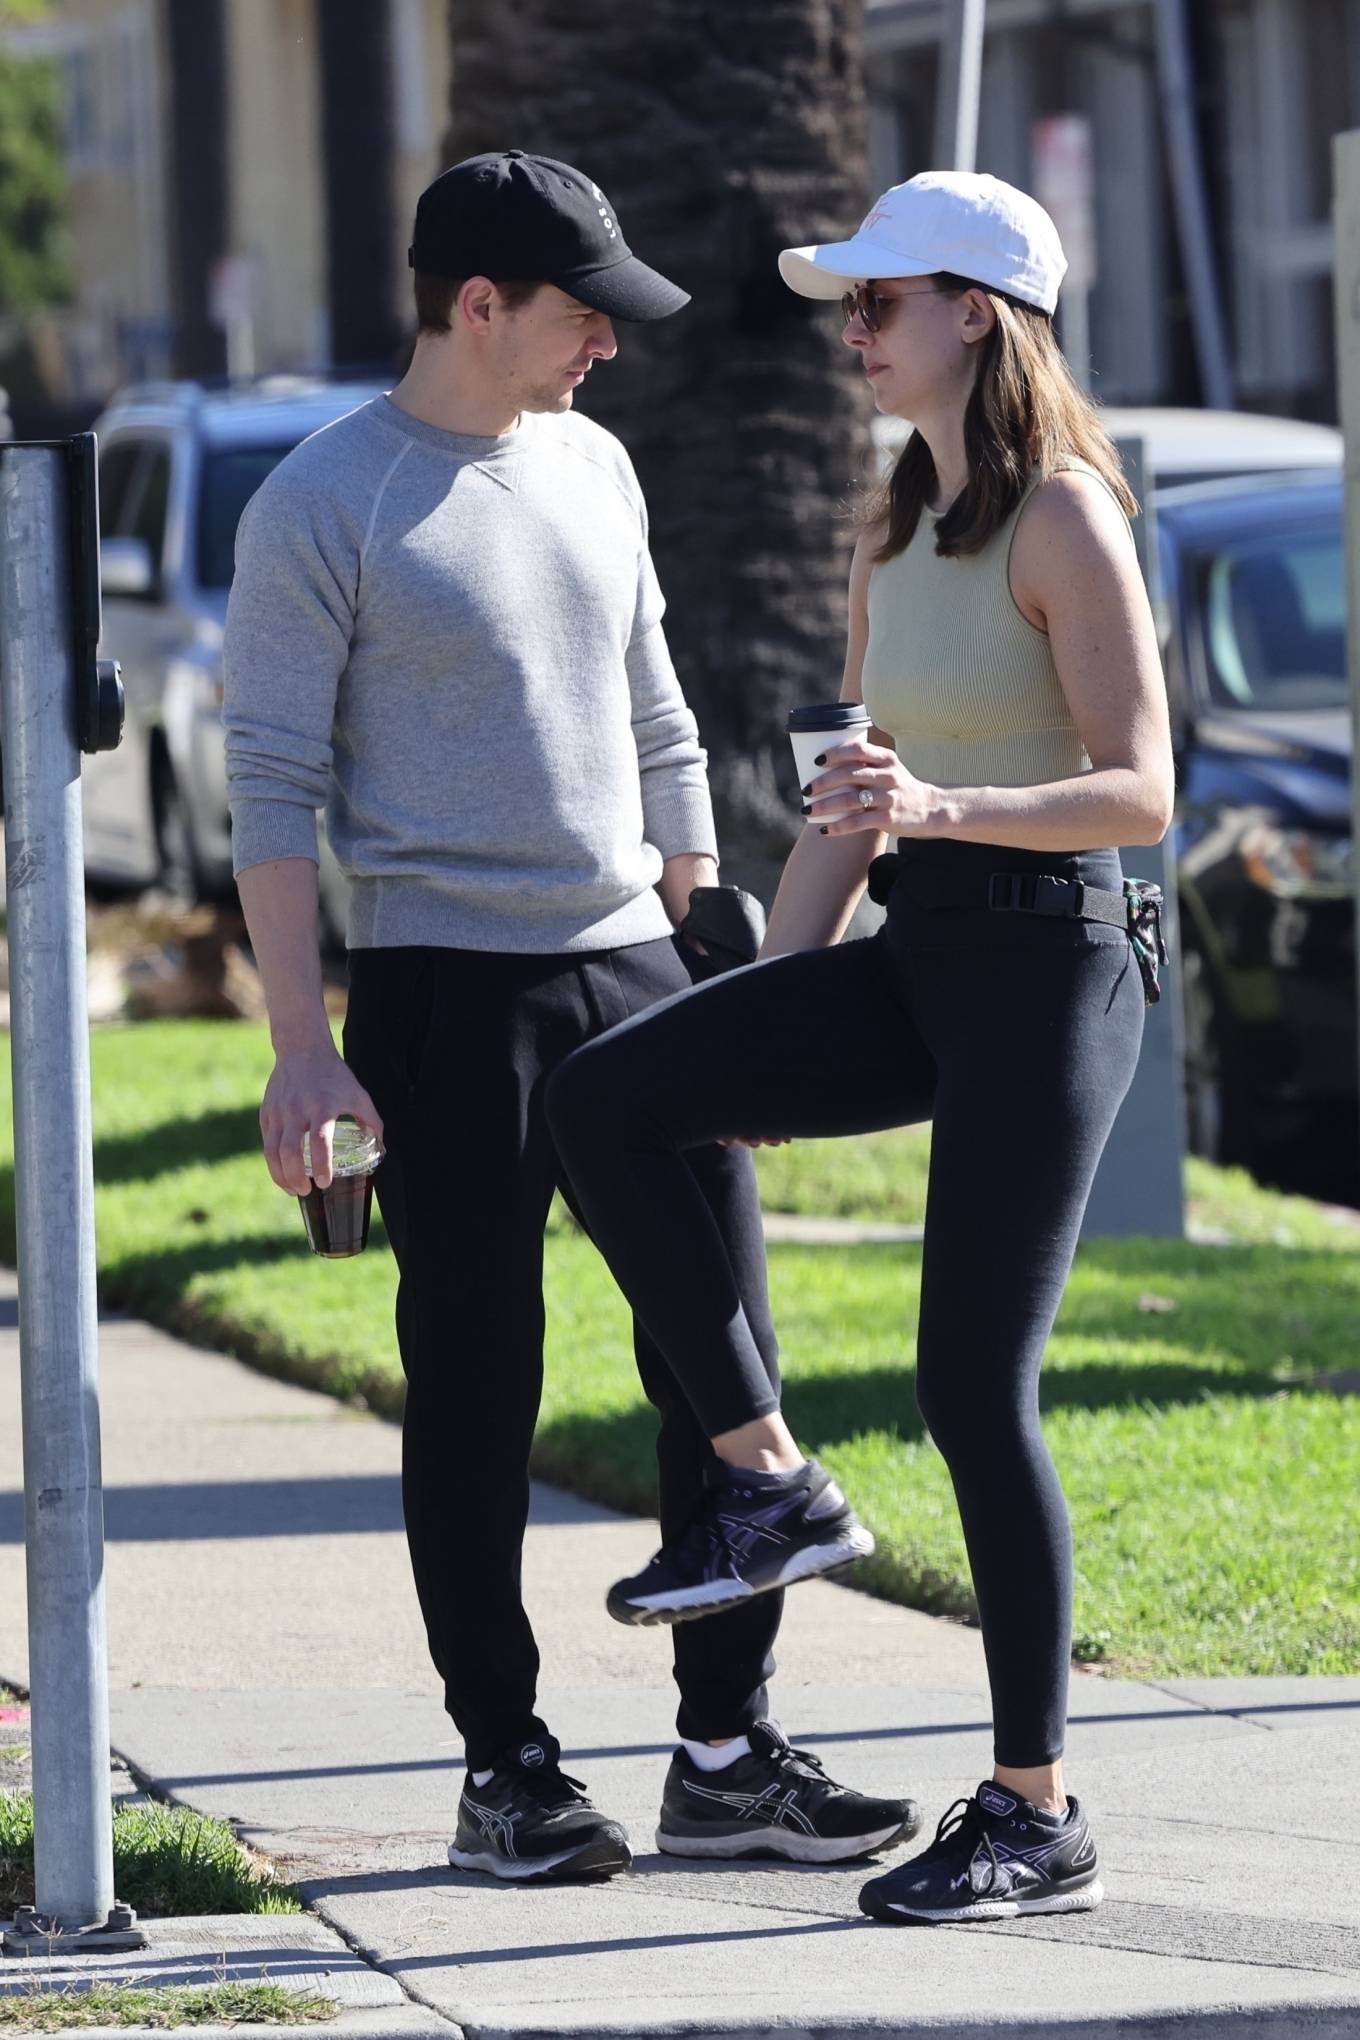 Alison Brie 2021 : Alison Brie – With Dave Franco in athleisure out in Los Angeles-01